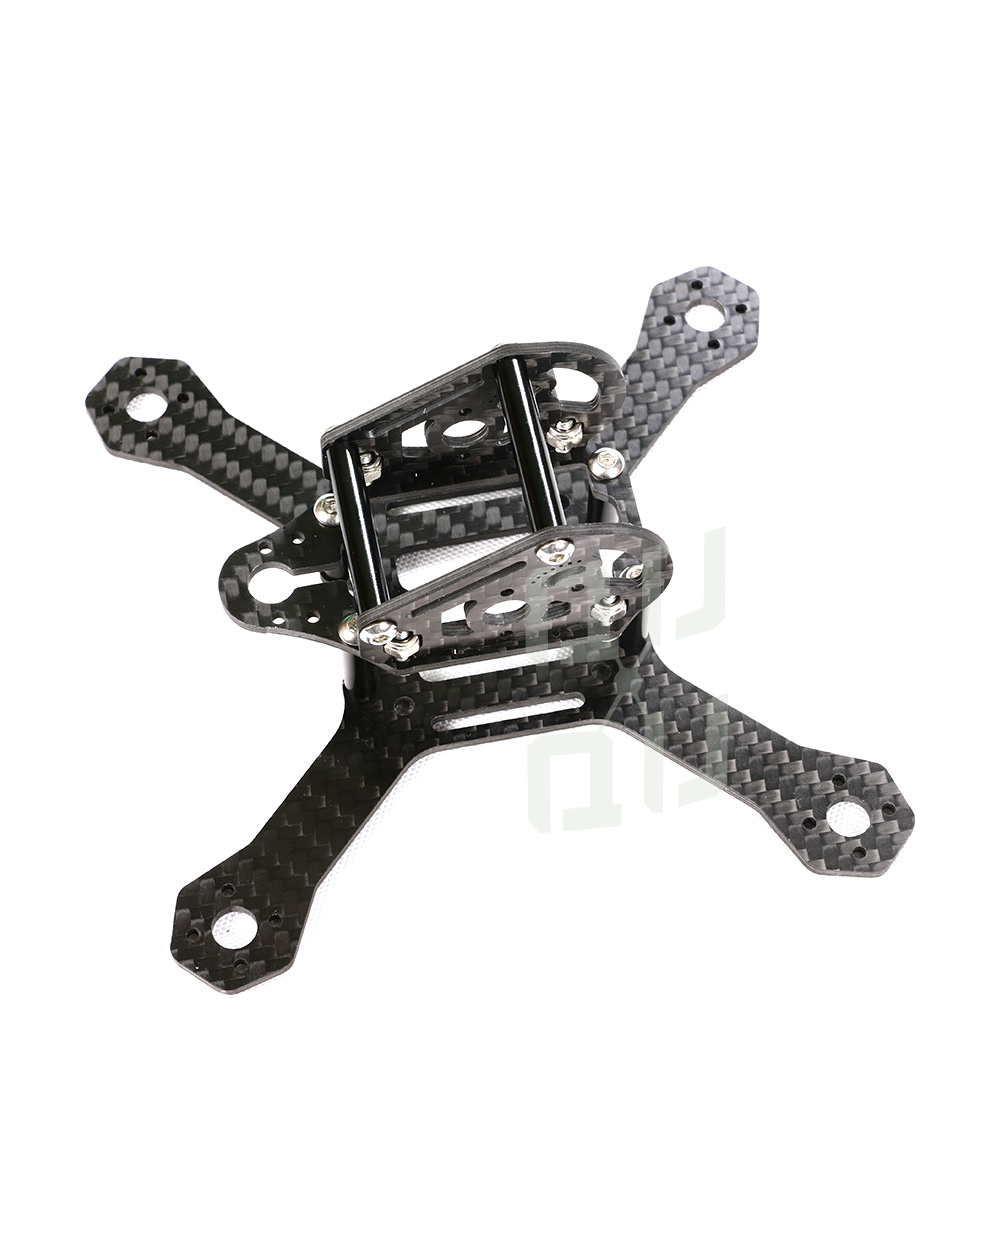 qq130 fully built 3" Racing Drone frame by QuadQuestions right view